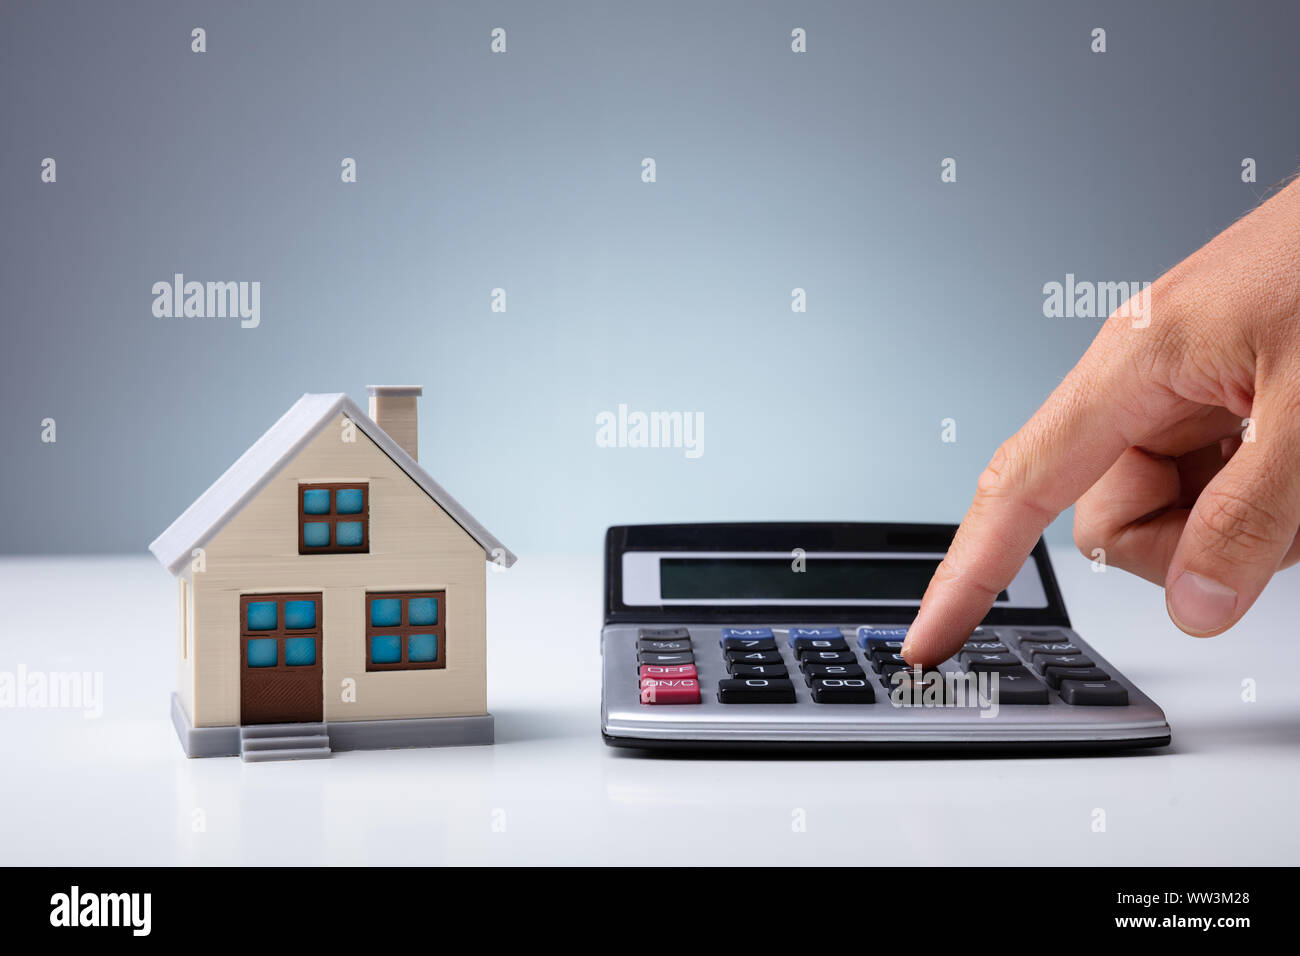 Person's Hand Calculating With Calculator Near House Model On Desk Stock Photo